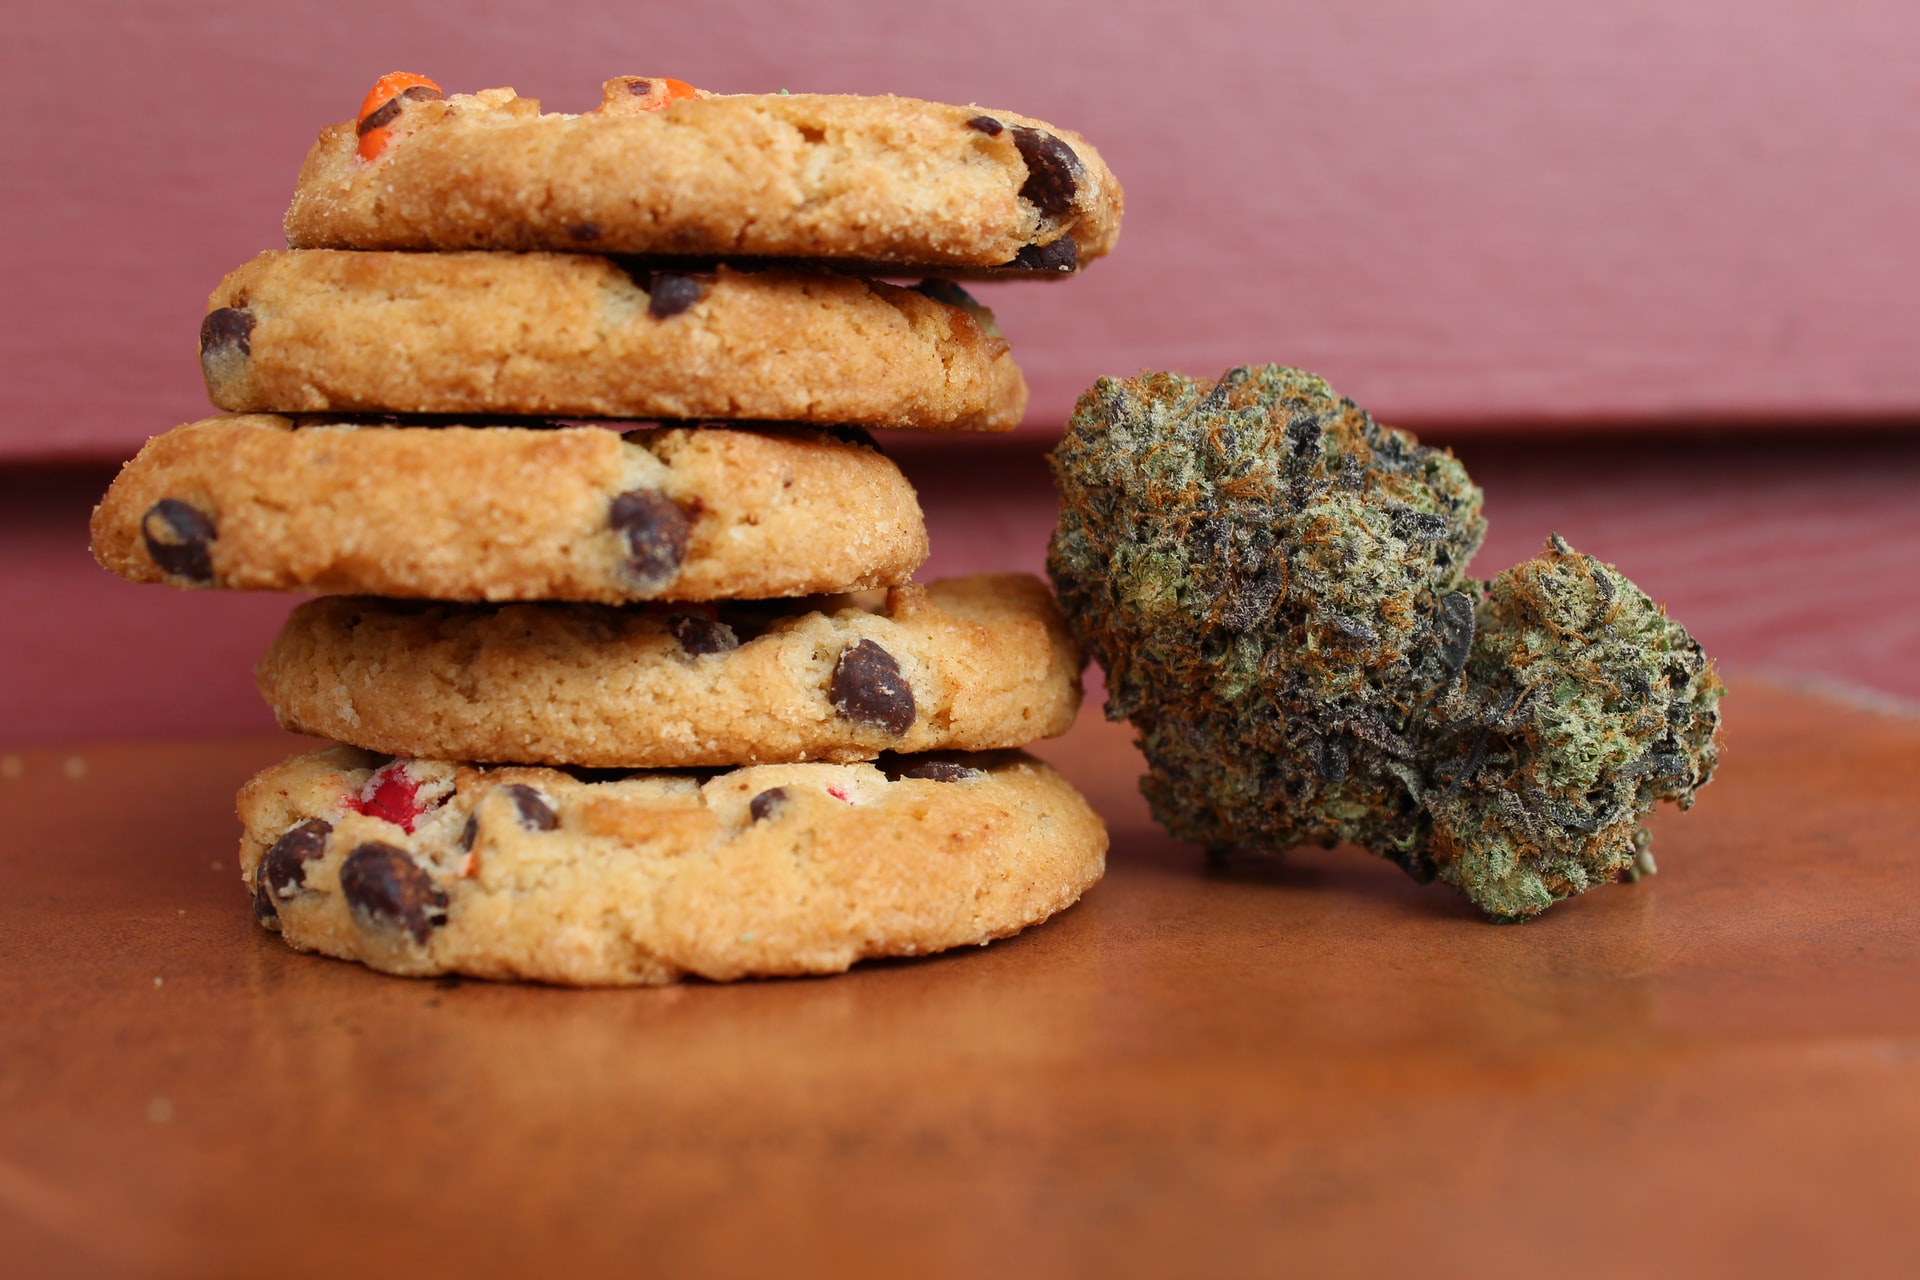 The Best Edible Cannabis Gifts for Your Significant Other